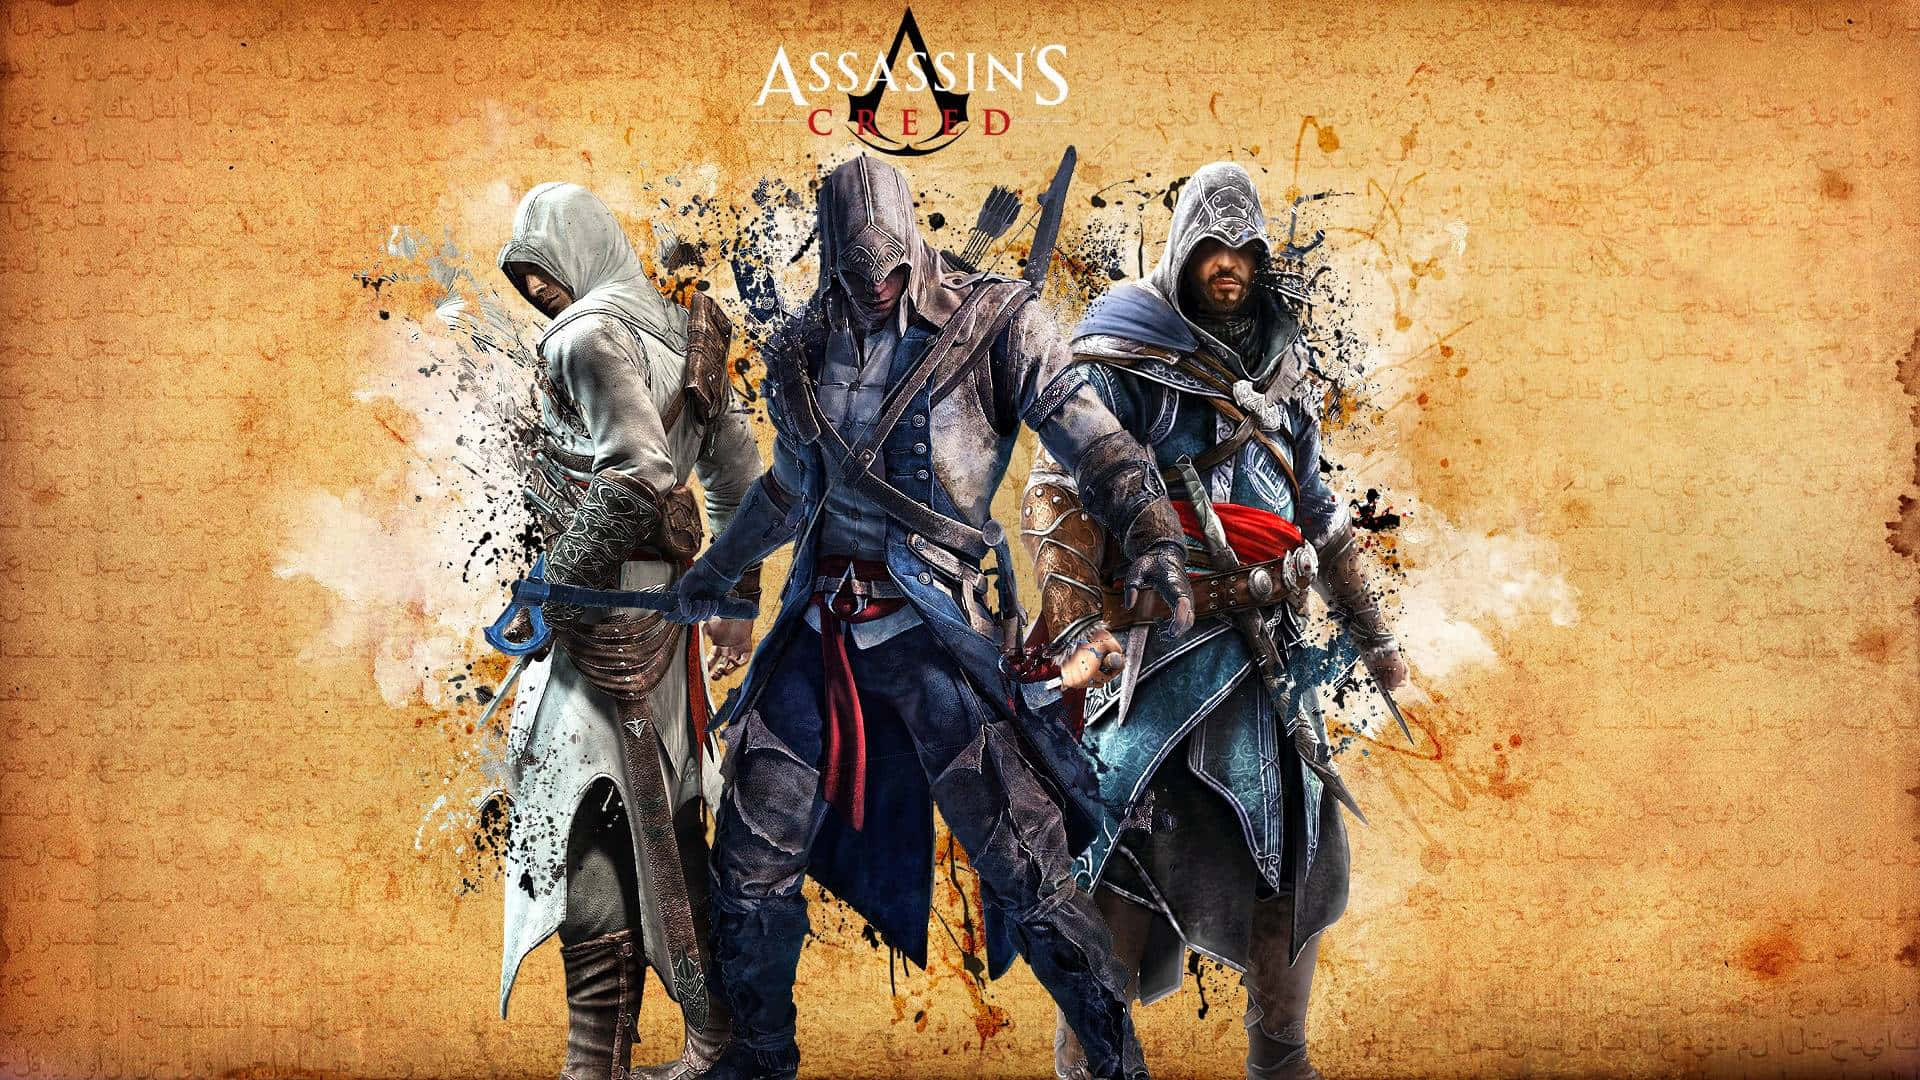 Hd Video Game Assassin's Creed Background